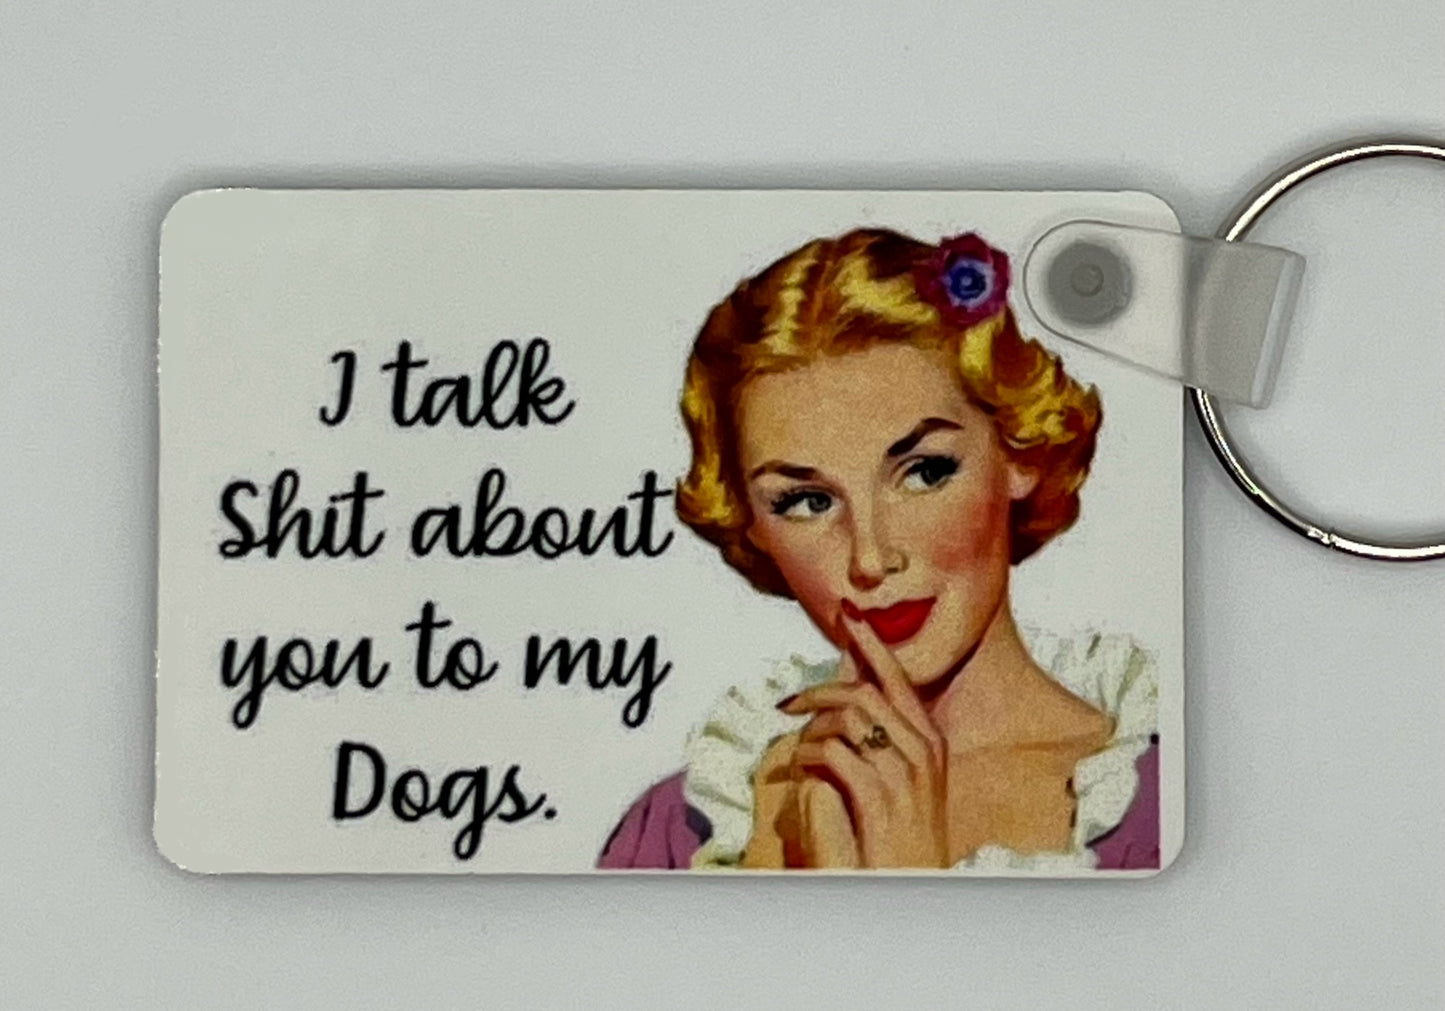 “I Talk Shit About You To My Dogs” 2.5x1.5” Keychain